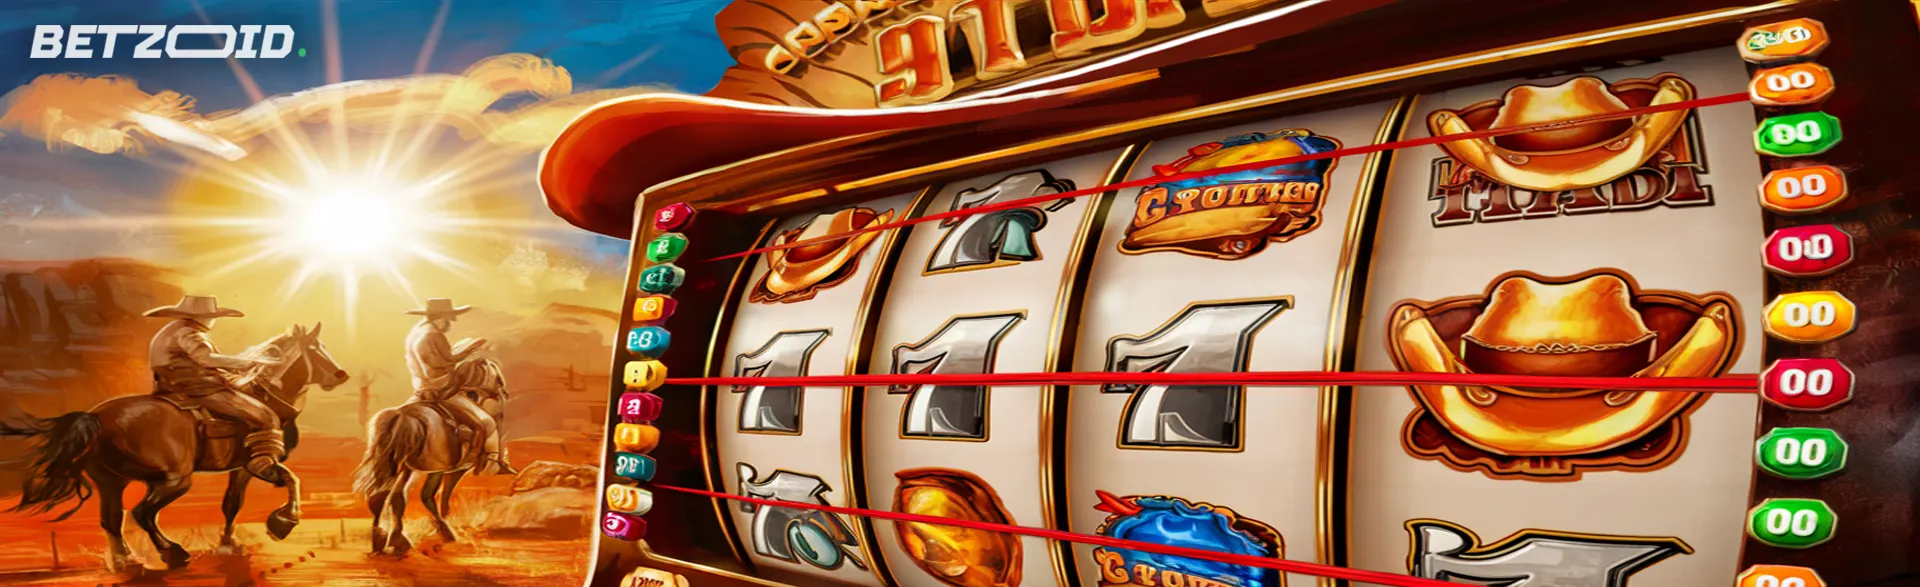 Casino games to play with free spins.